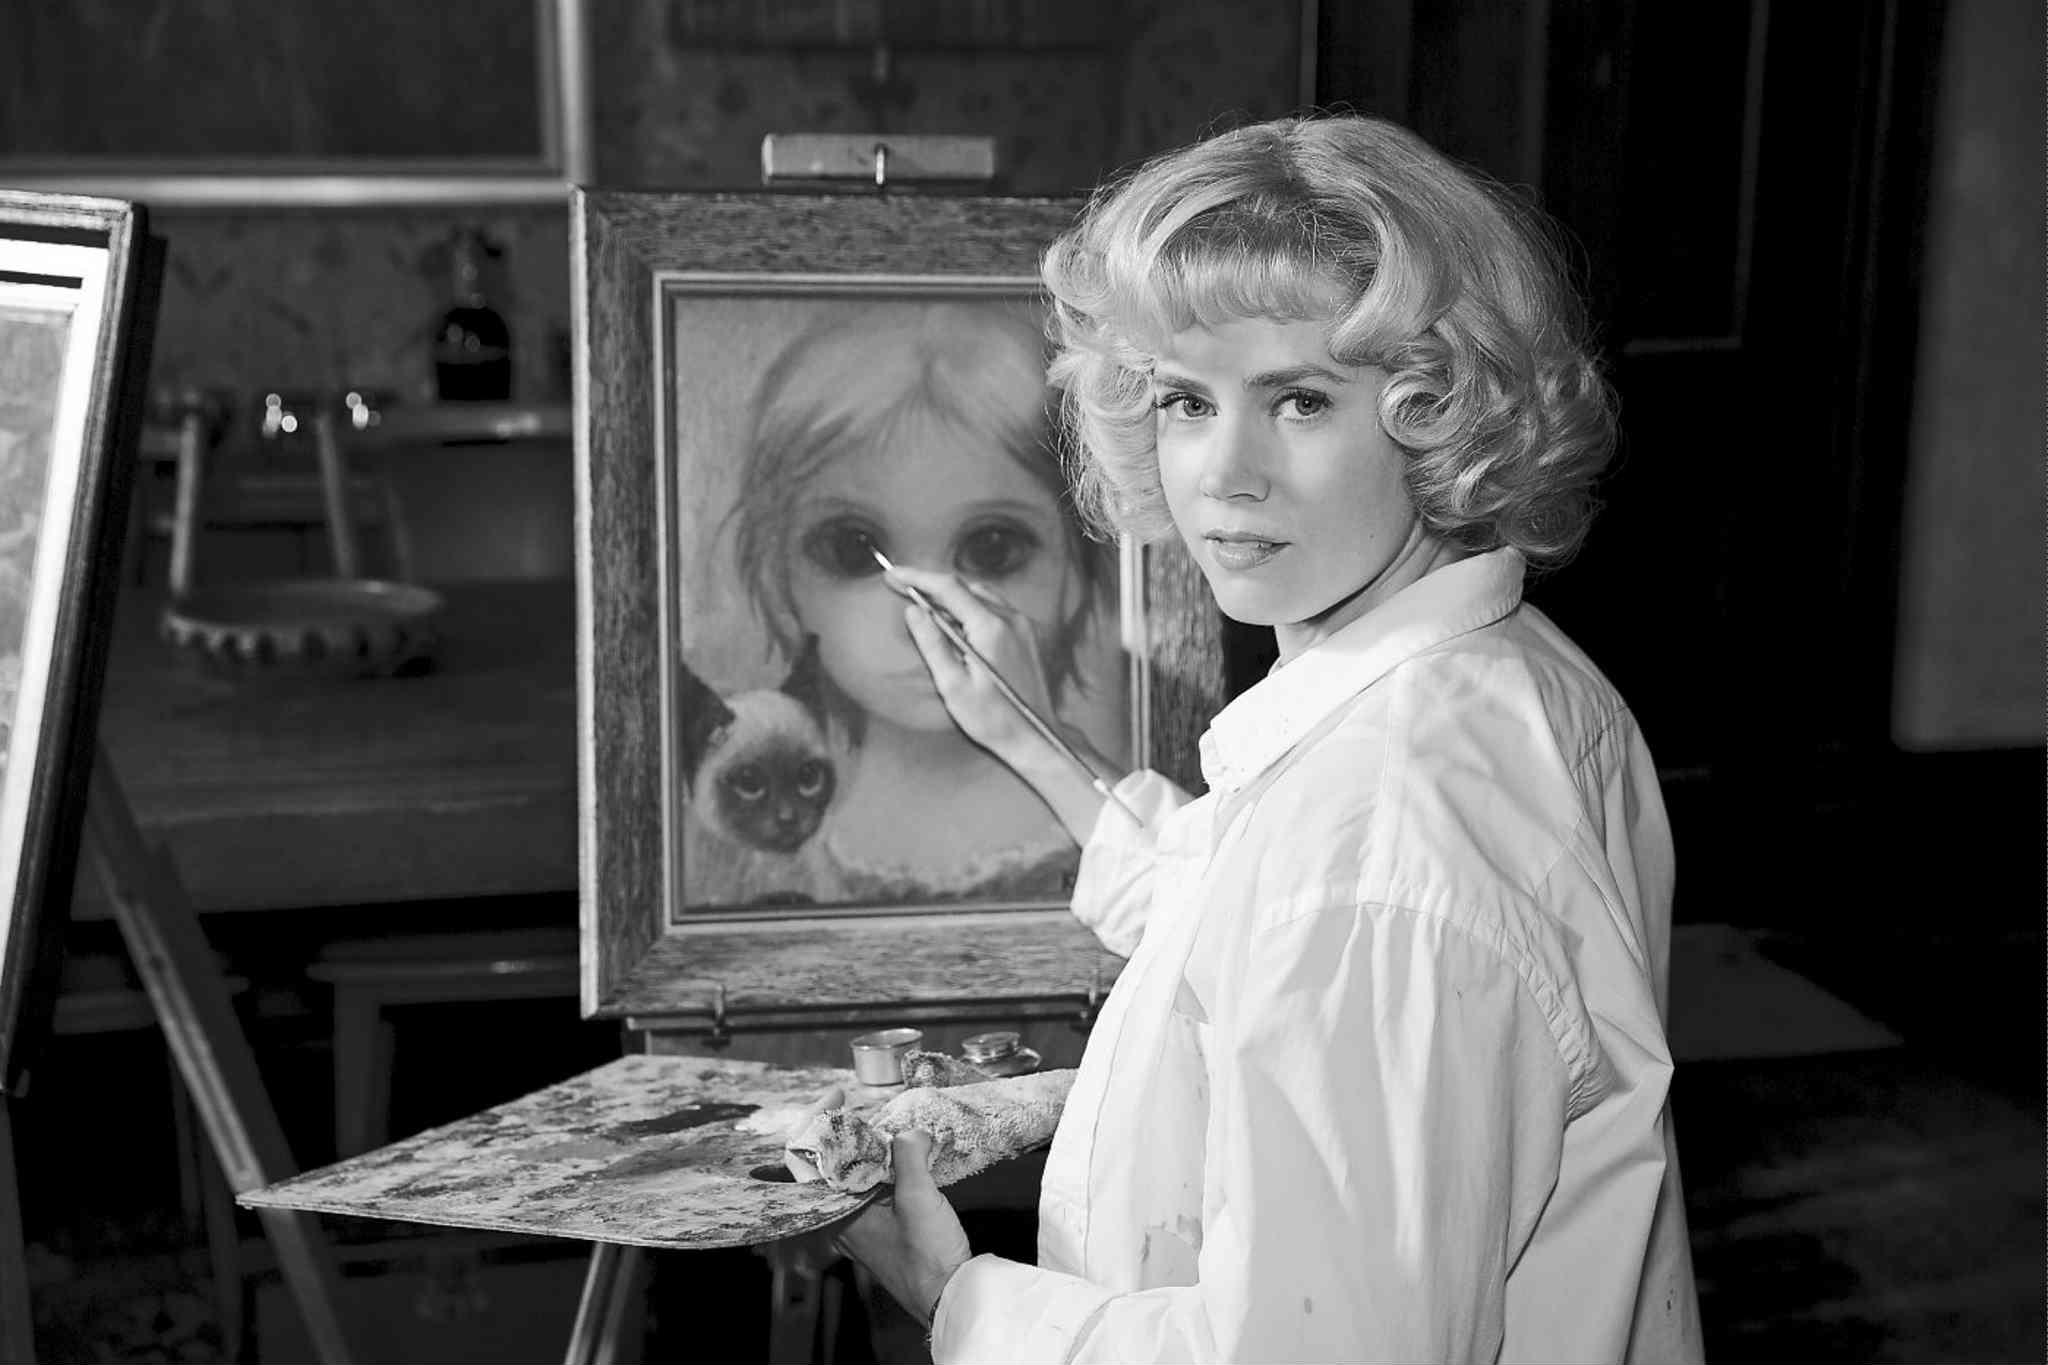 Walter Keane was sued by his wife Margaret for claiming to be the painter of the "big eye waif" children, she personally created a painting in 53 minutes in the court room to prove her accusation.